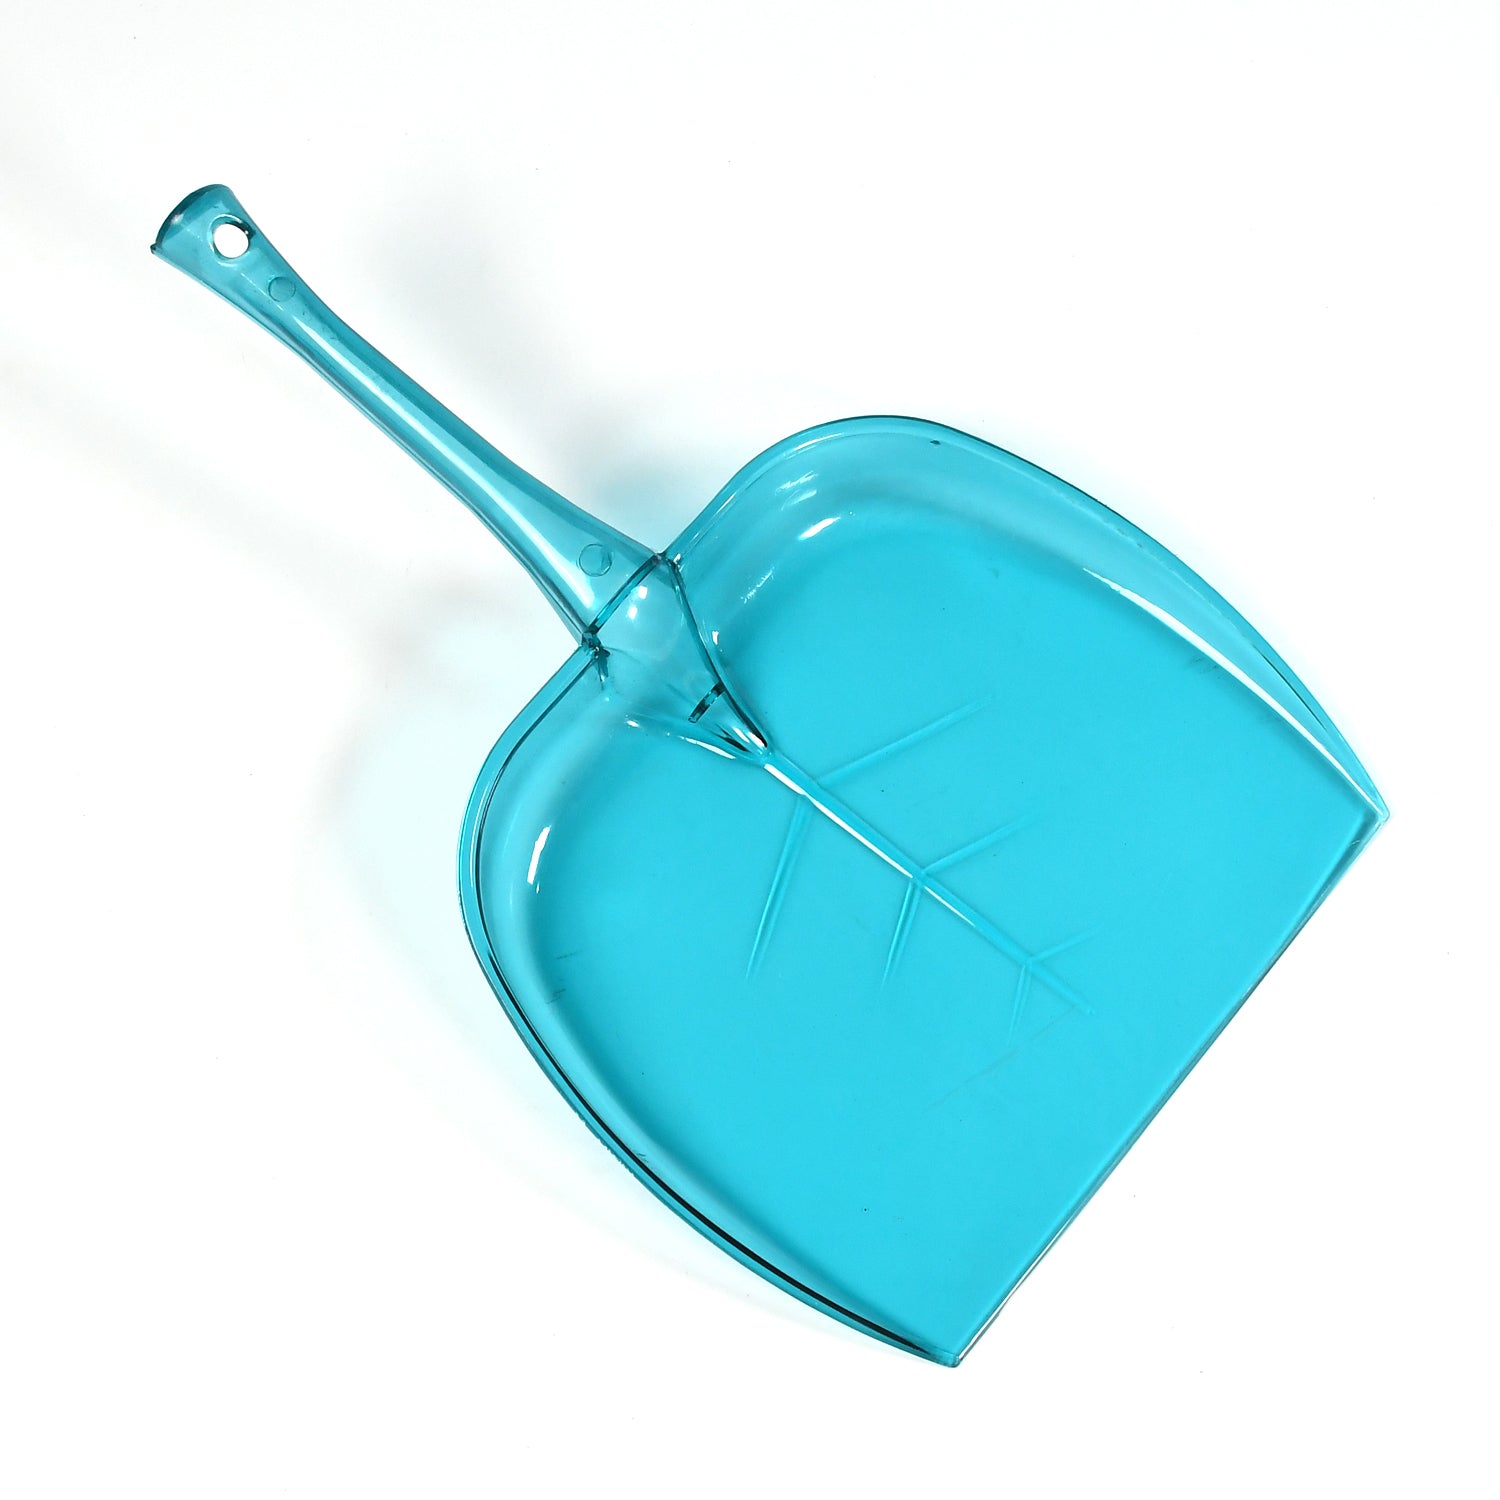 Plastic Unbreakable Dustpan Big Size with Long Handle Dust Collector Pan for Home and Kitchen(Pack of 1pc)